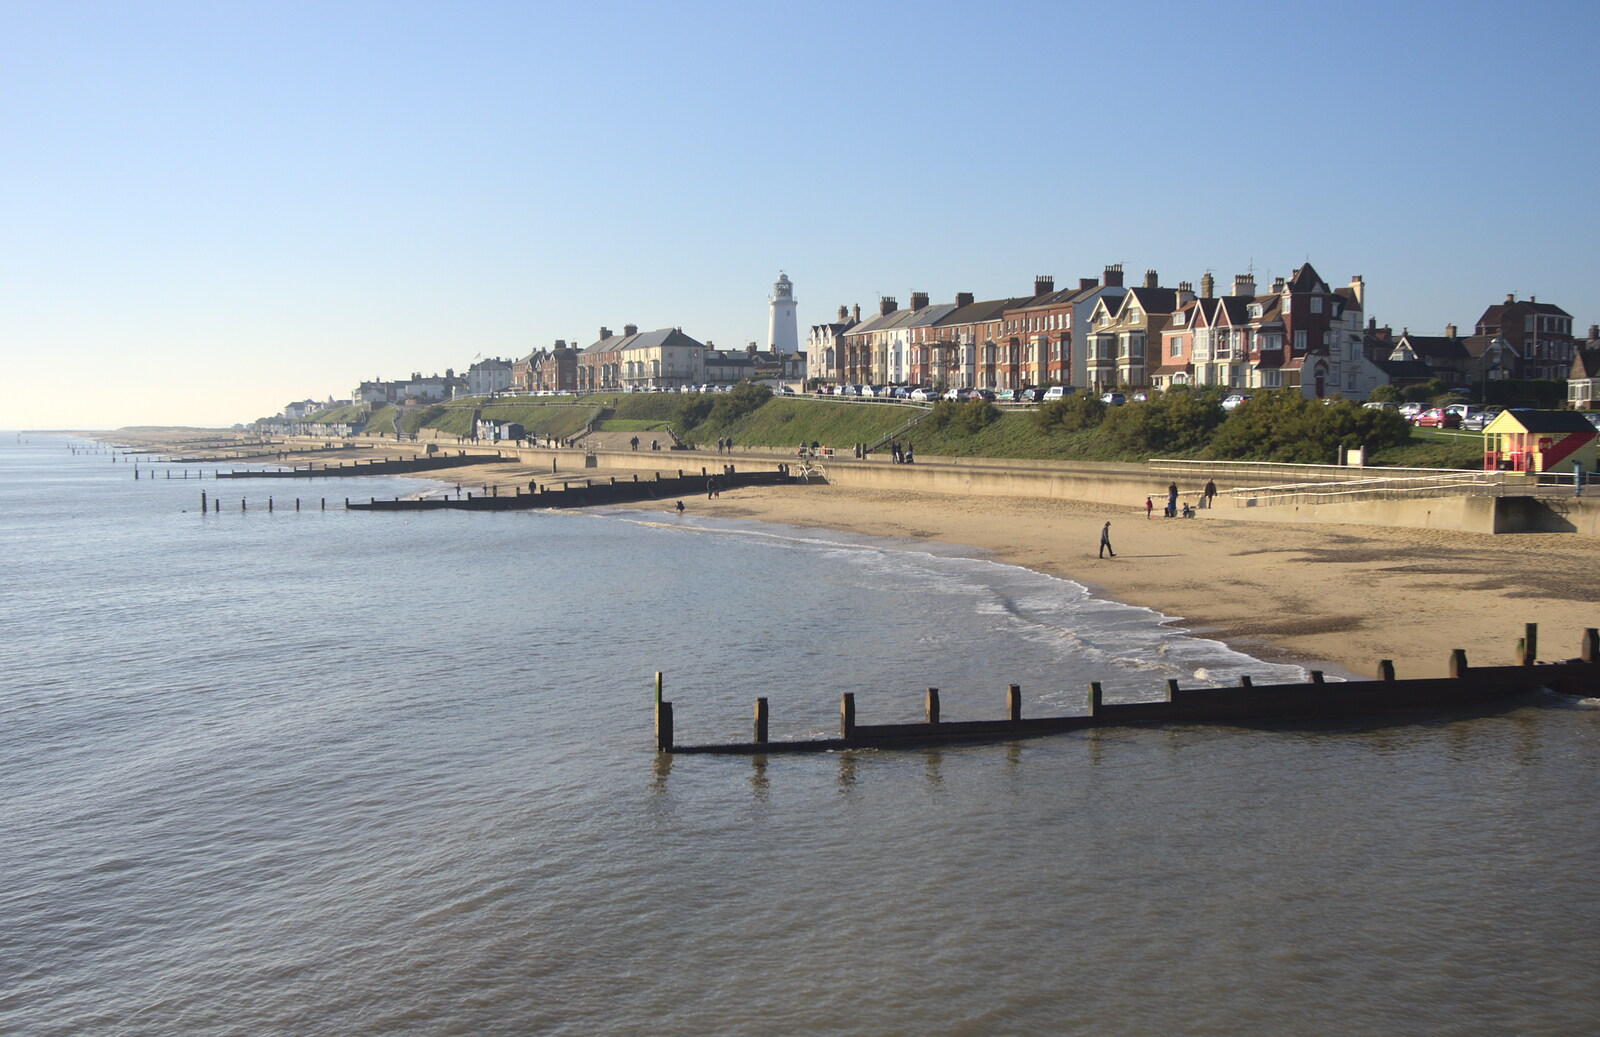 A view of Southwold from halfway don the pier from A Busy Day, Southwold and Thornham, Suffolk - 11th November 2012